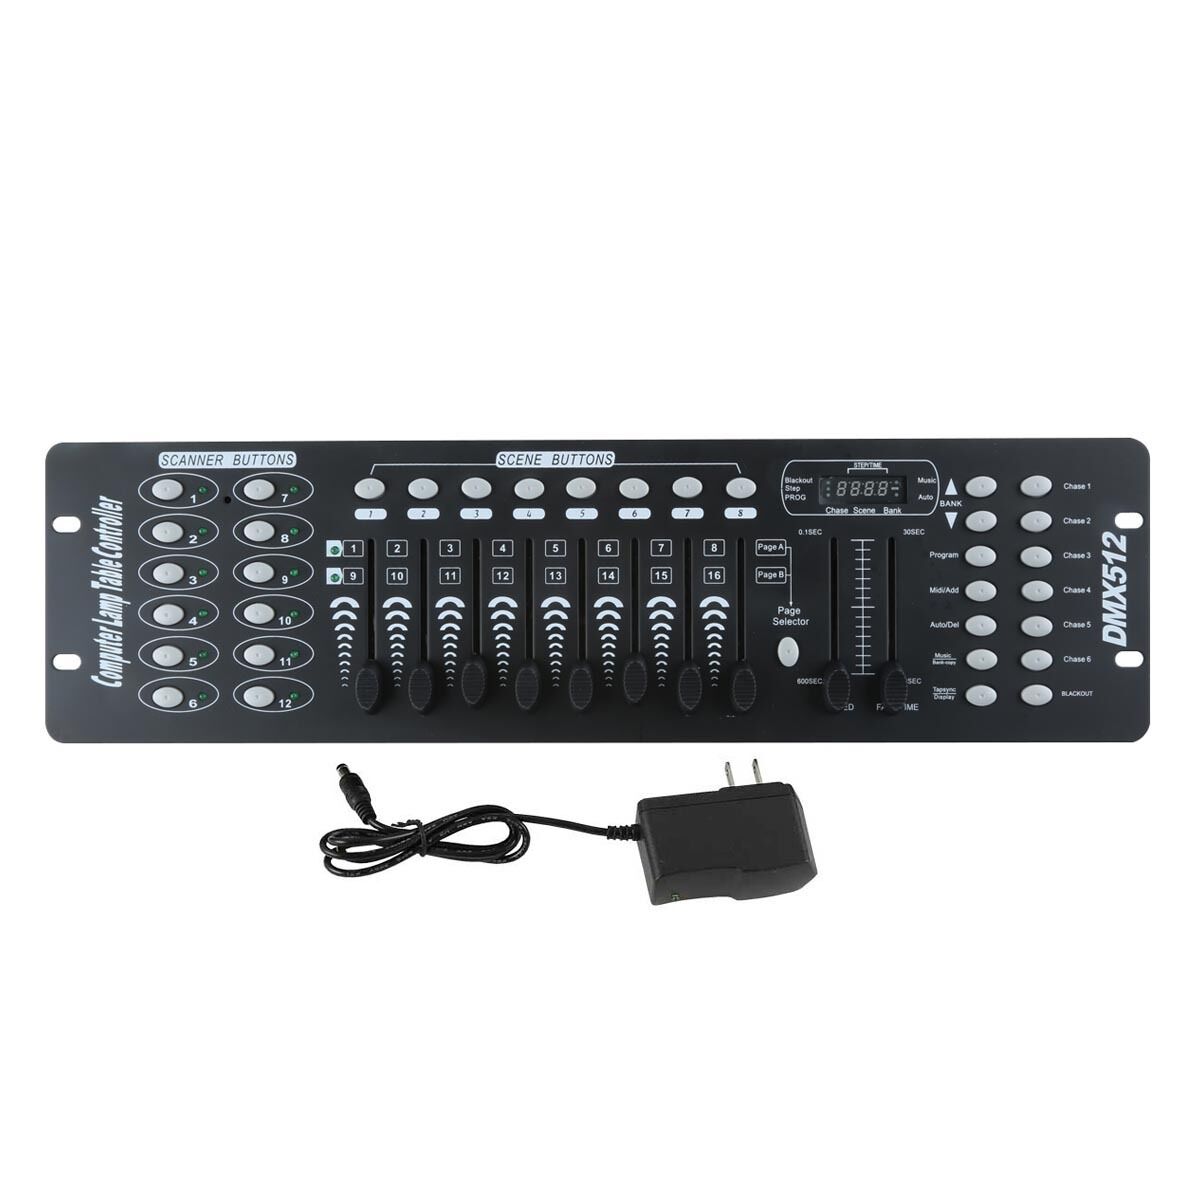 192 Channels DMX512 Controller Console For Stage Light Party DJ Laser Operator.